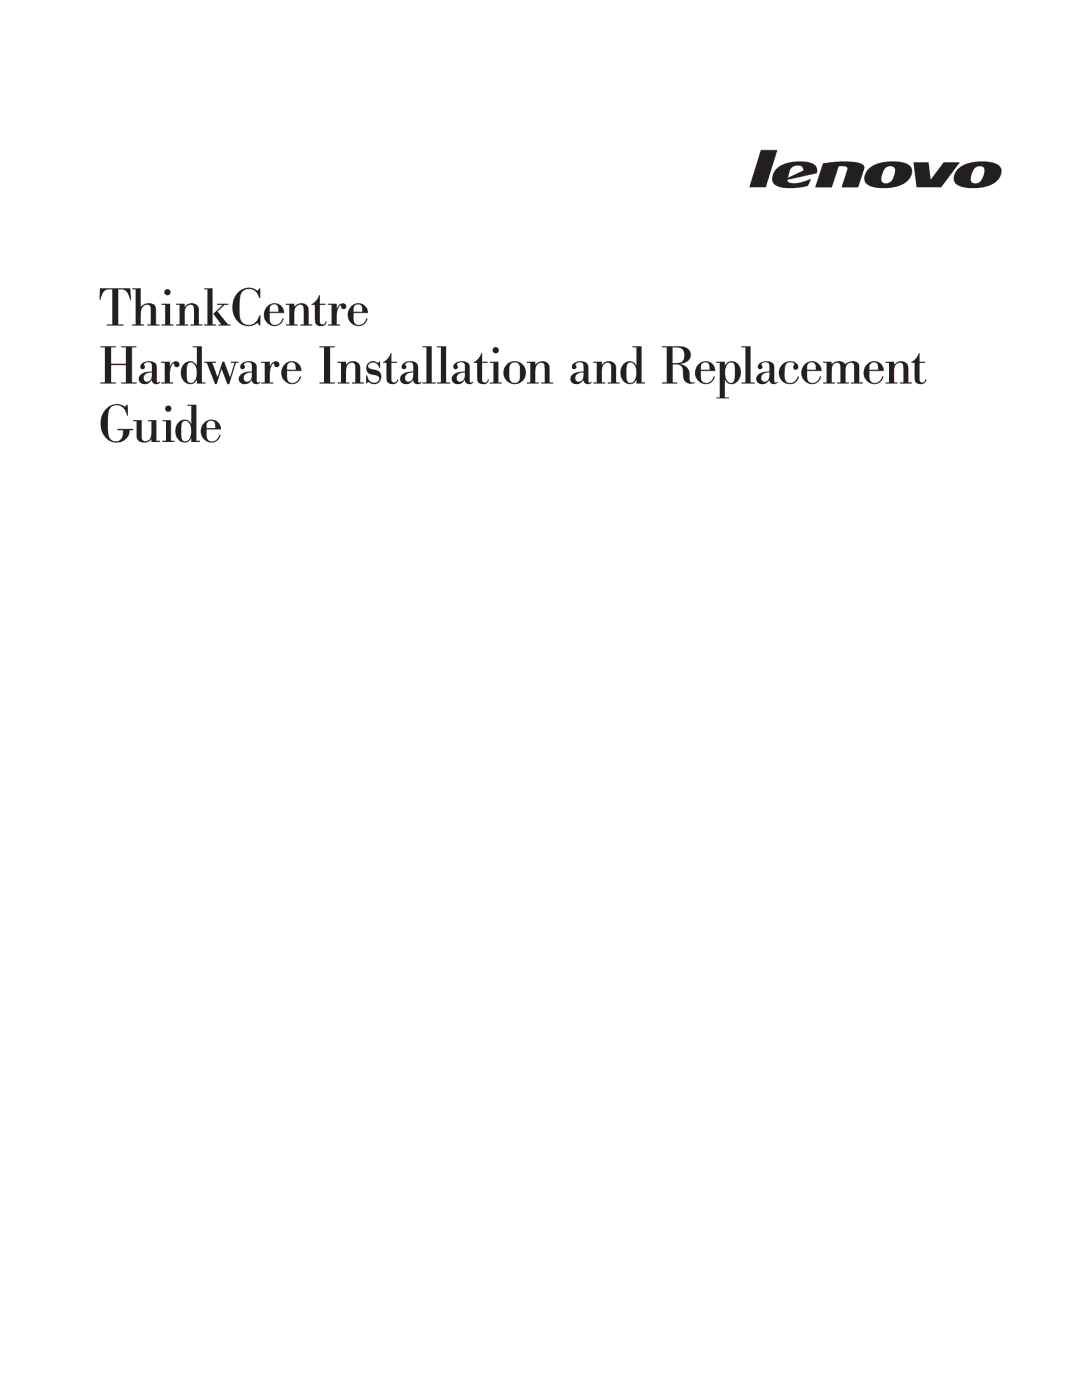 Lenovo 9358, 9784, 9489, 9703, 9481, 9351, 9438, 7096, 9792, 9949, 9853 ThinkCentre Hardware Installation and Replacement Guide 